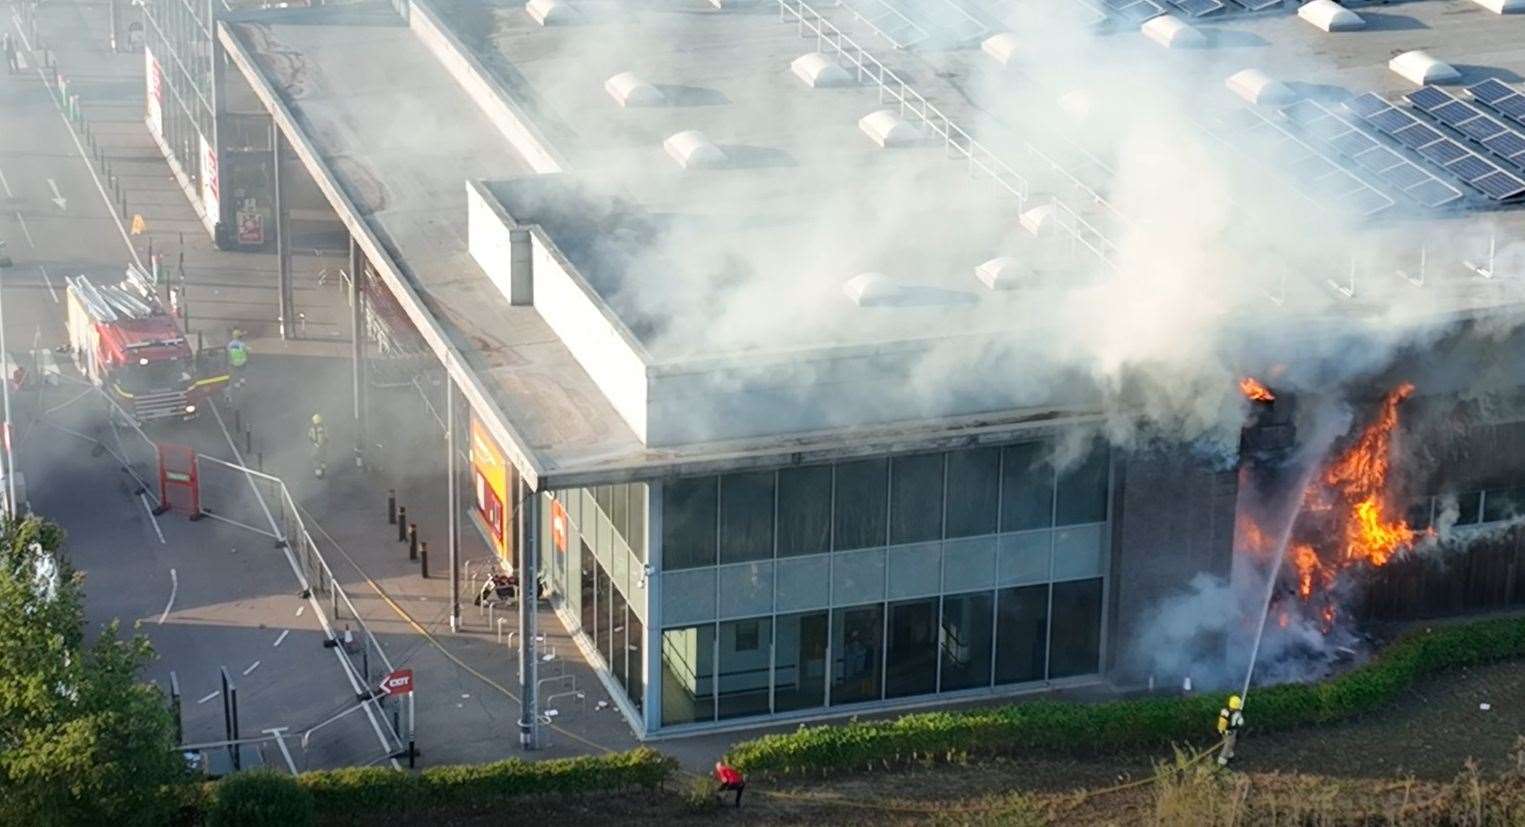 Firefighters tackling the blaze at Lynn's Hardwick Sainsbury's store in September. Picture: the drone people